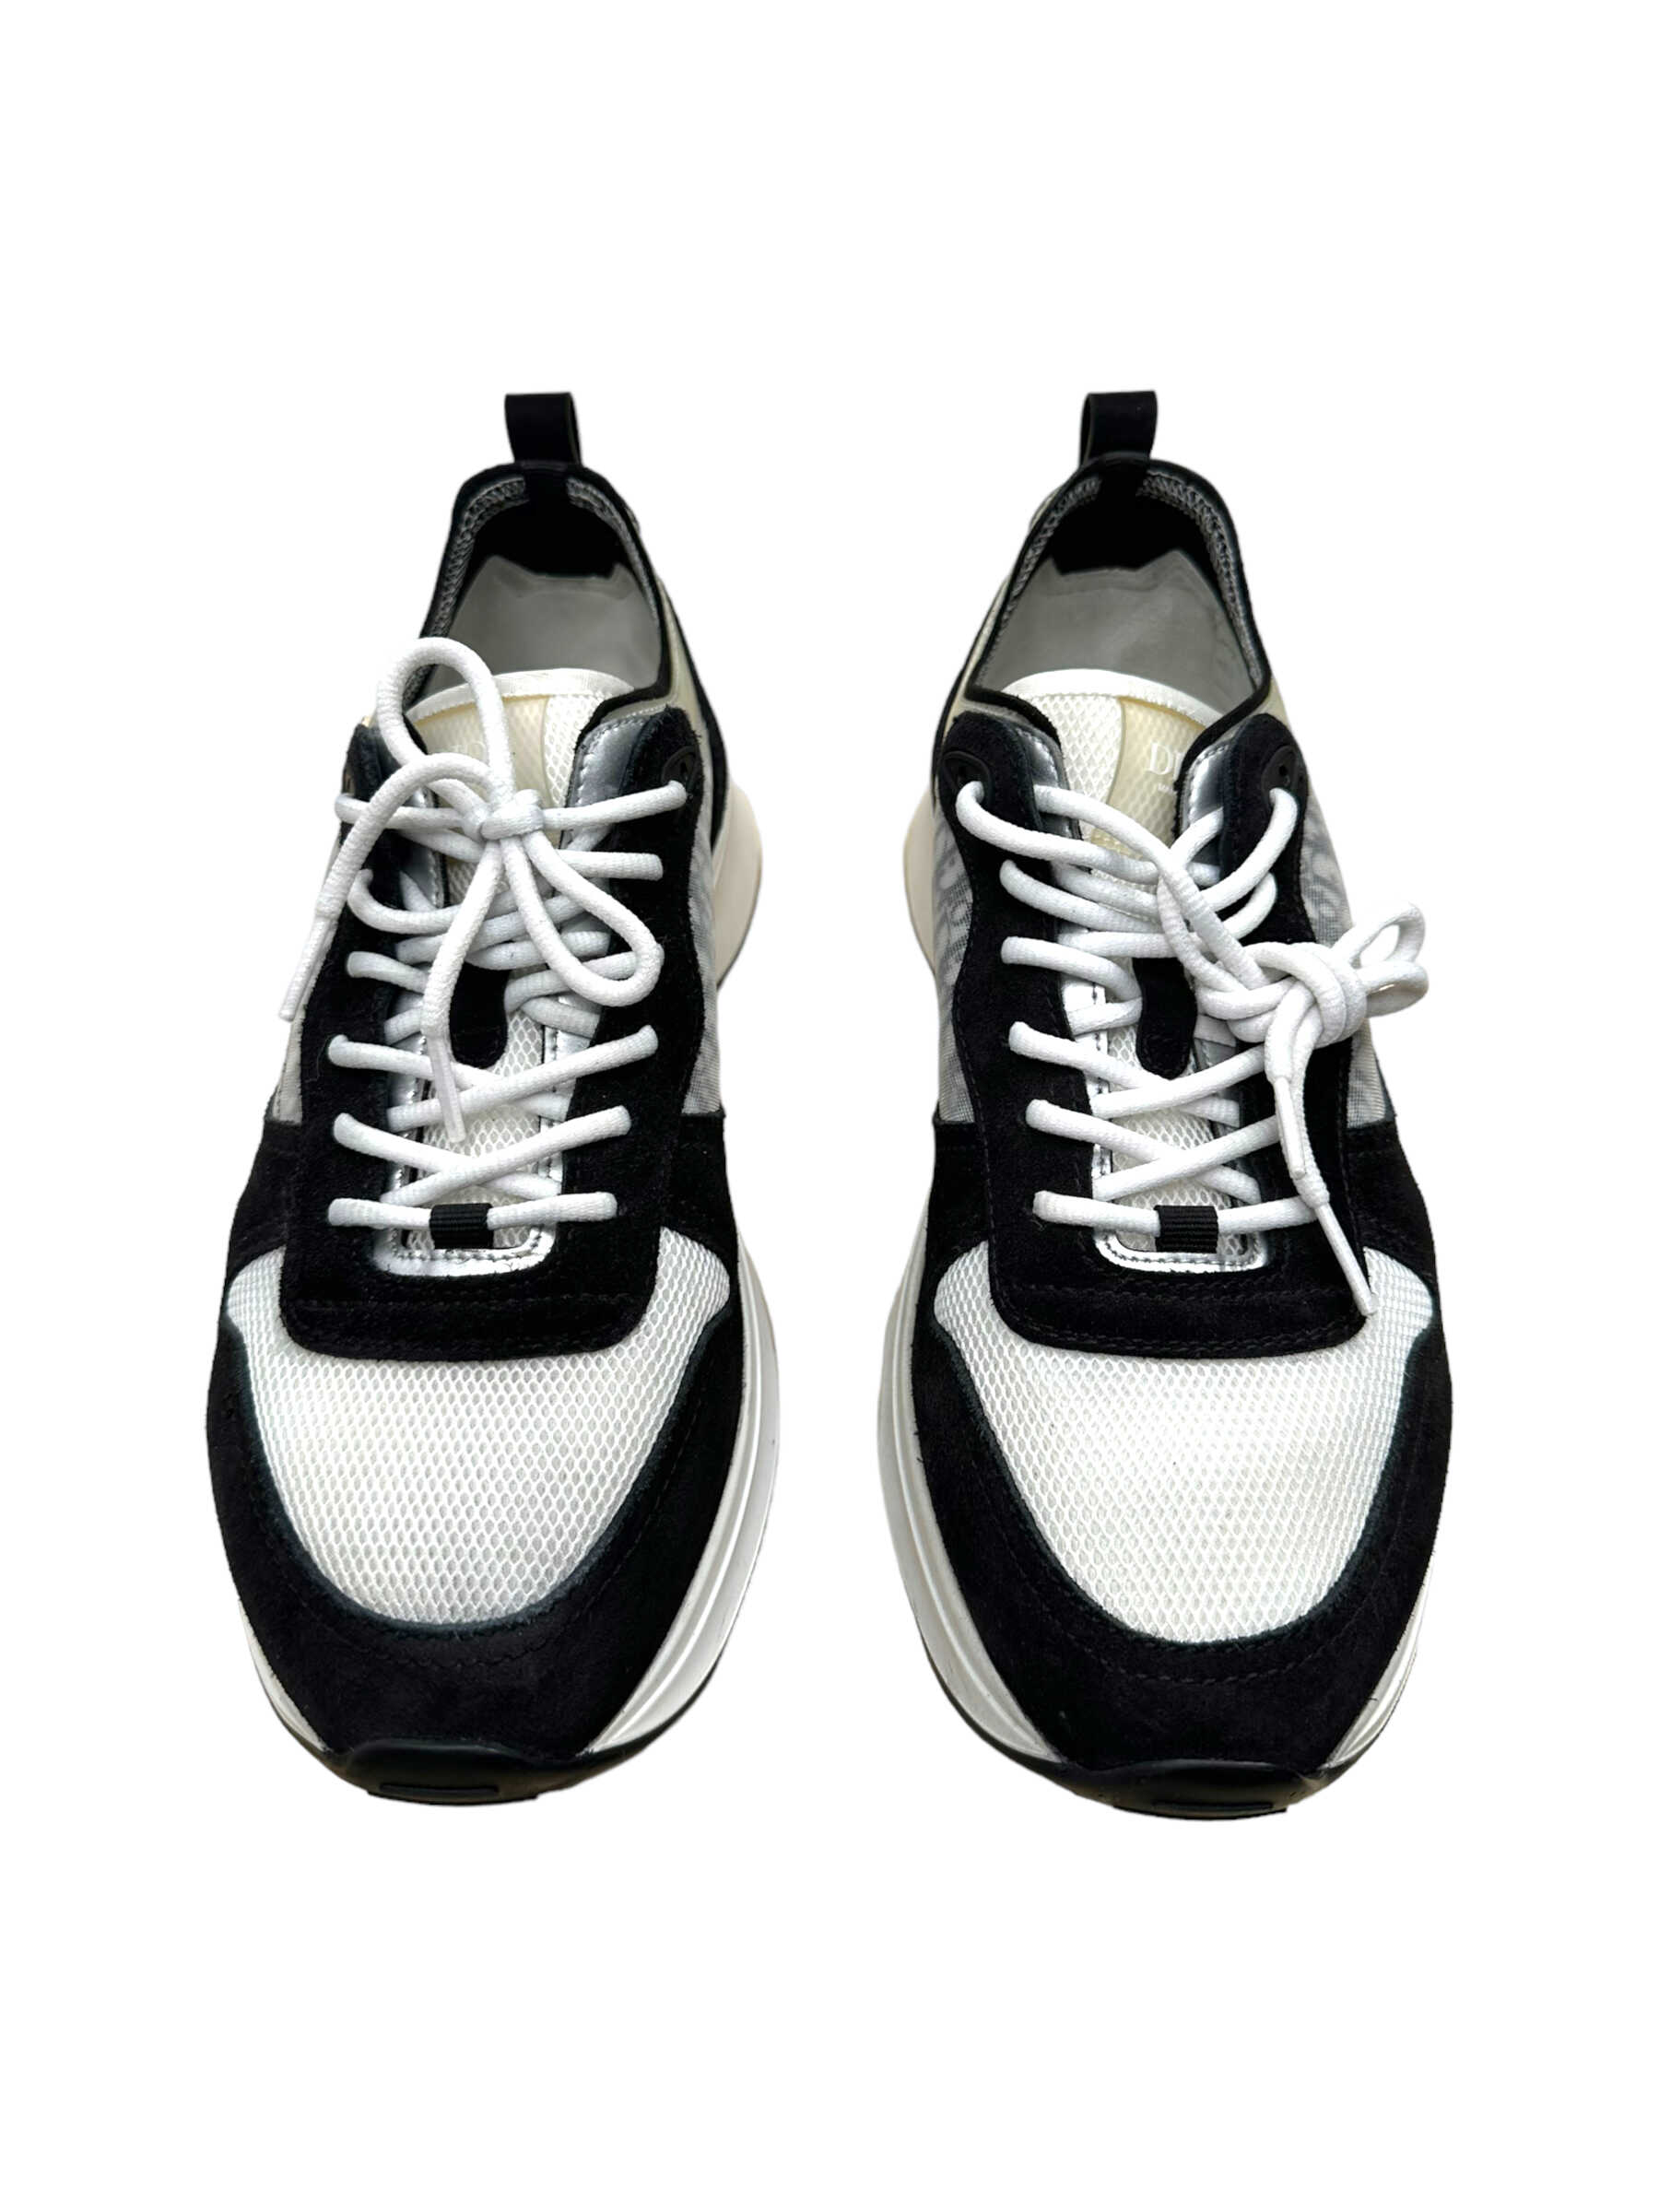 Christian Dior B25 Low Top Black Sneakers - Genuine Design Luxury Consignment Calgary, Alberta, Canada New and Pre-Owned Clothing, Shoes, Accessories.